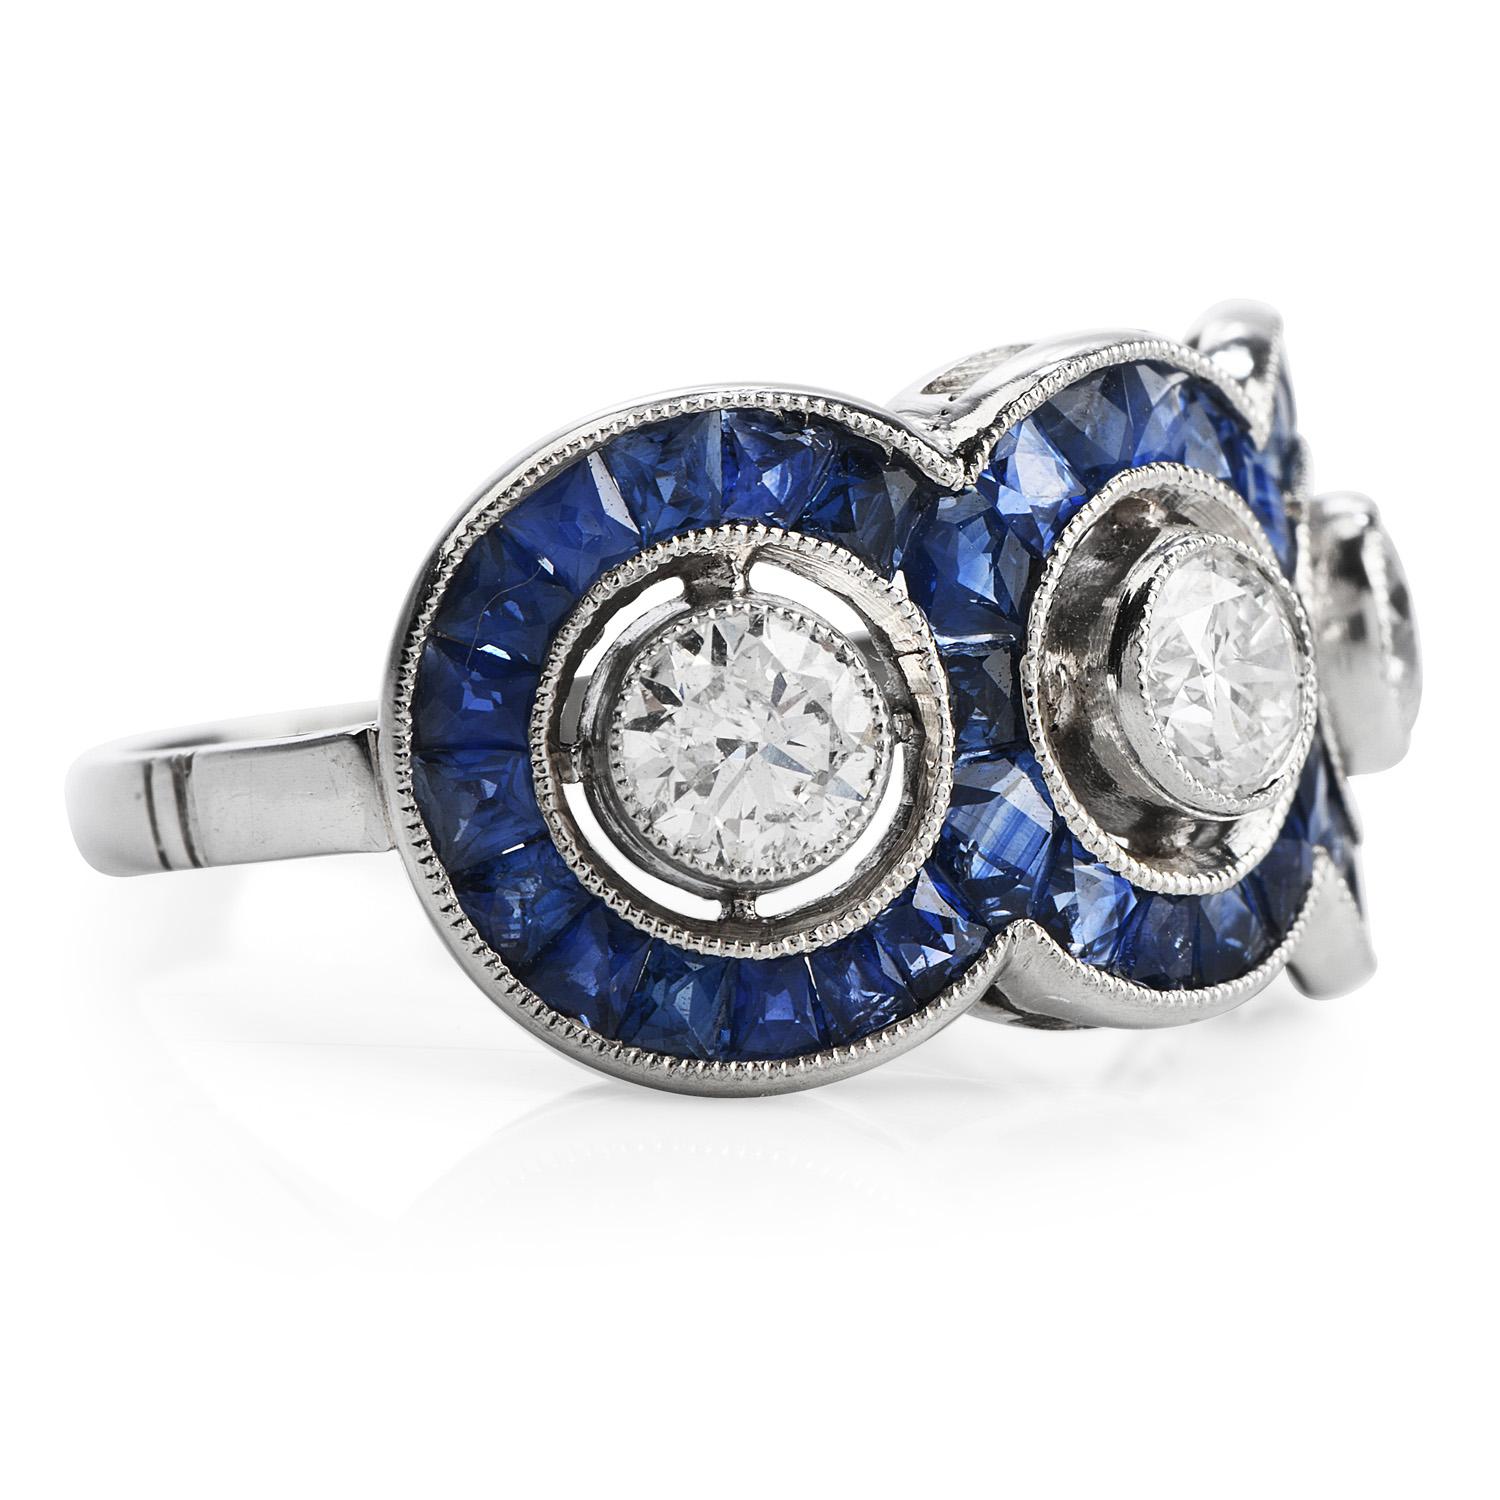 his vintage diamond sapphire engagement ring is crafted in solid platinum. Showcasing three round European cut diamonds, bezel-set in decorative filigree open gallery work extending into sizable shank weighing approx. 1.10 carats, G-H color, Si1